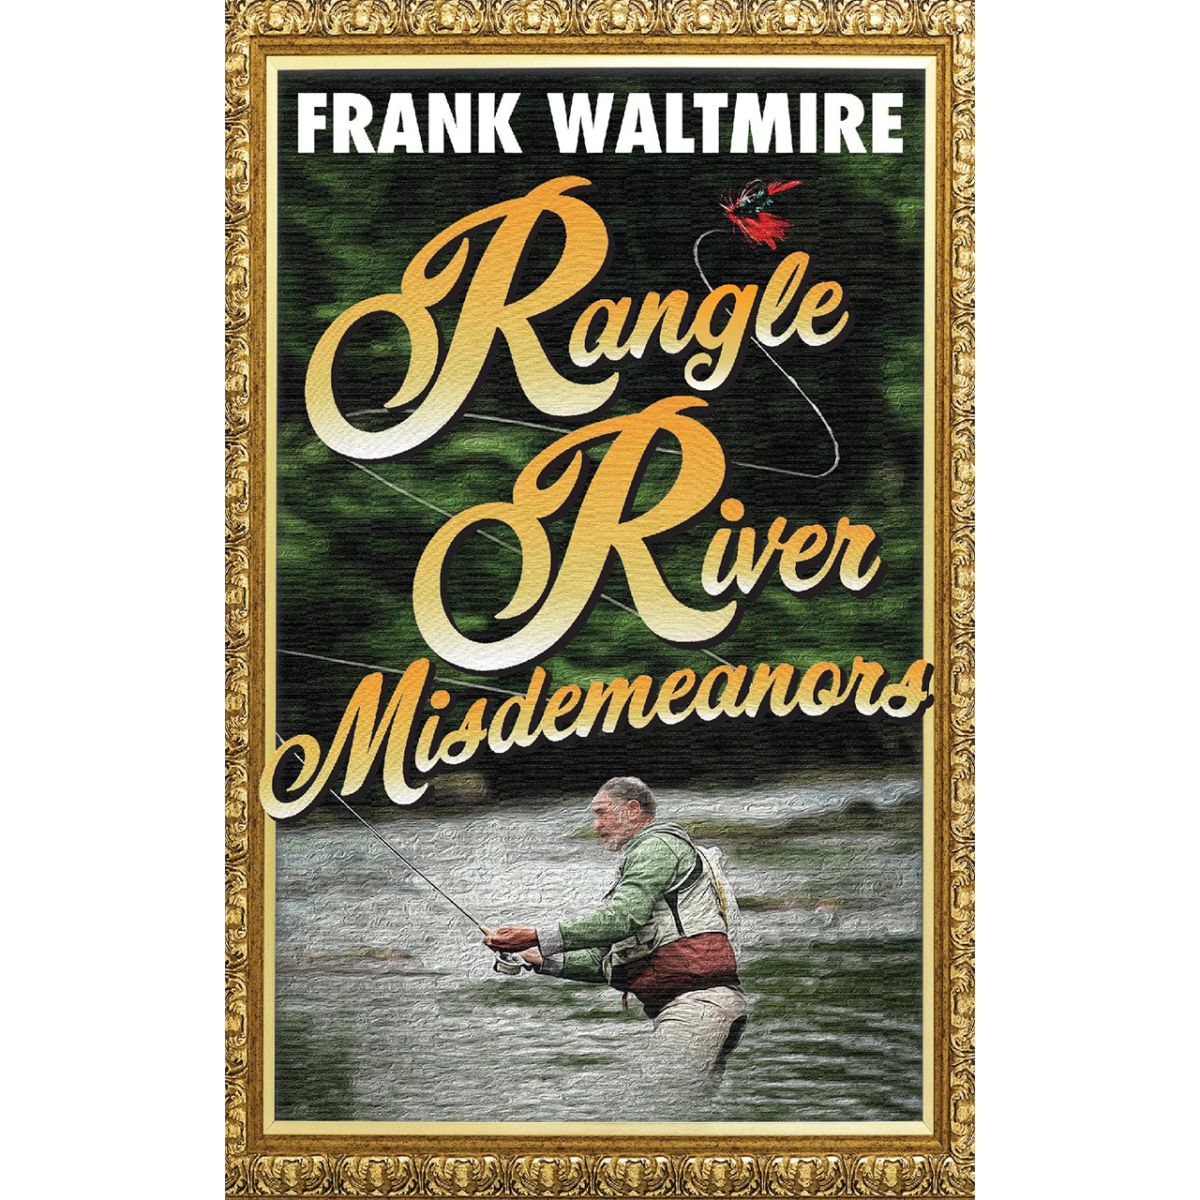 Rangle River Misdemeanors by Frank Waltmire